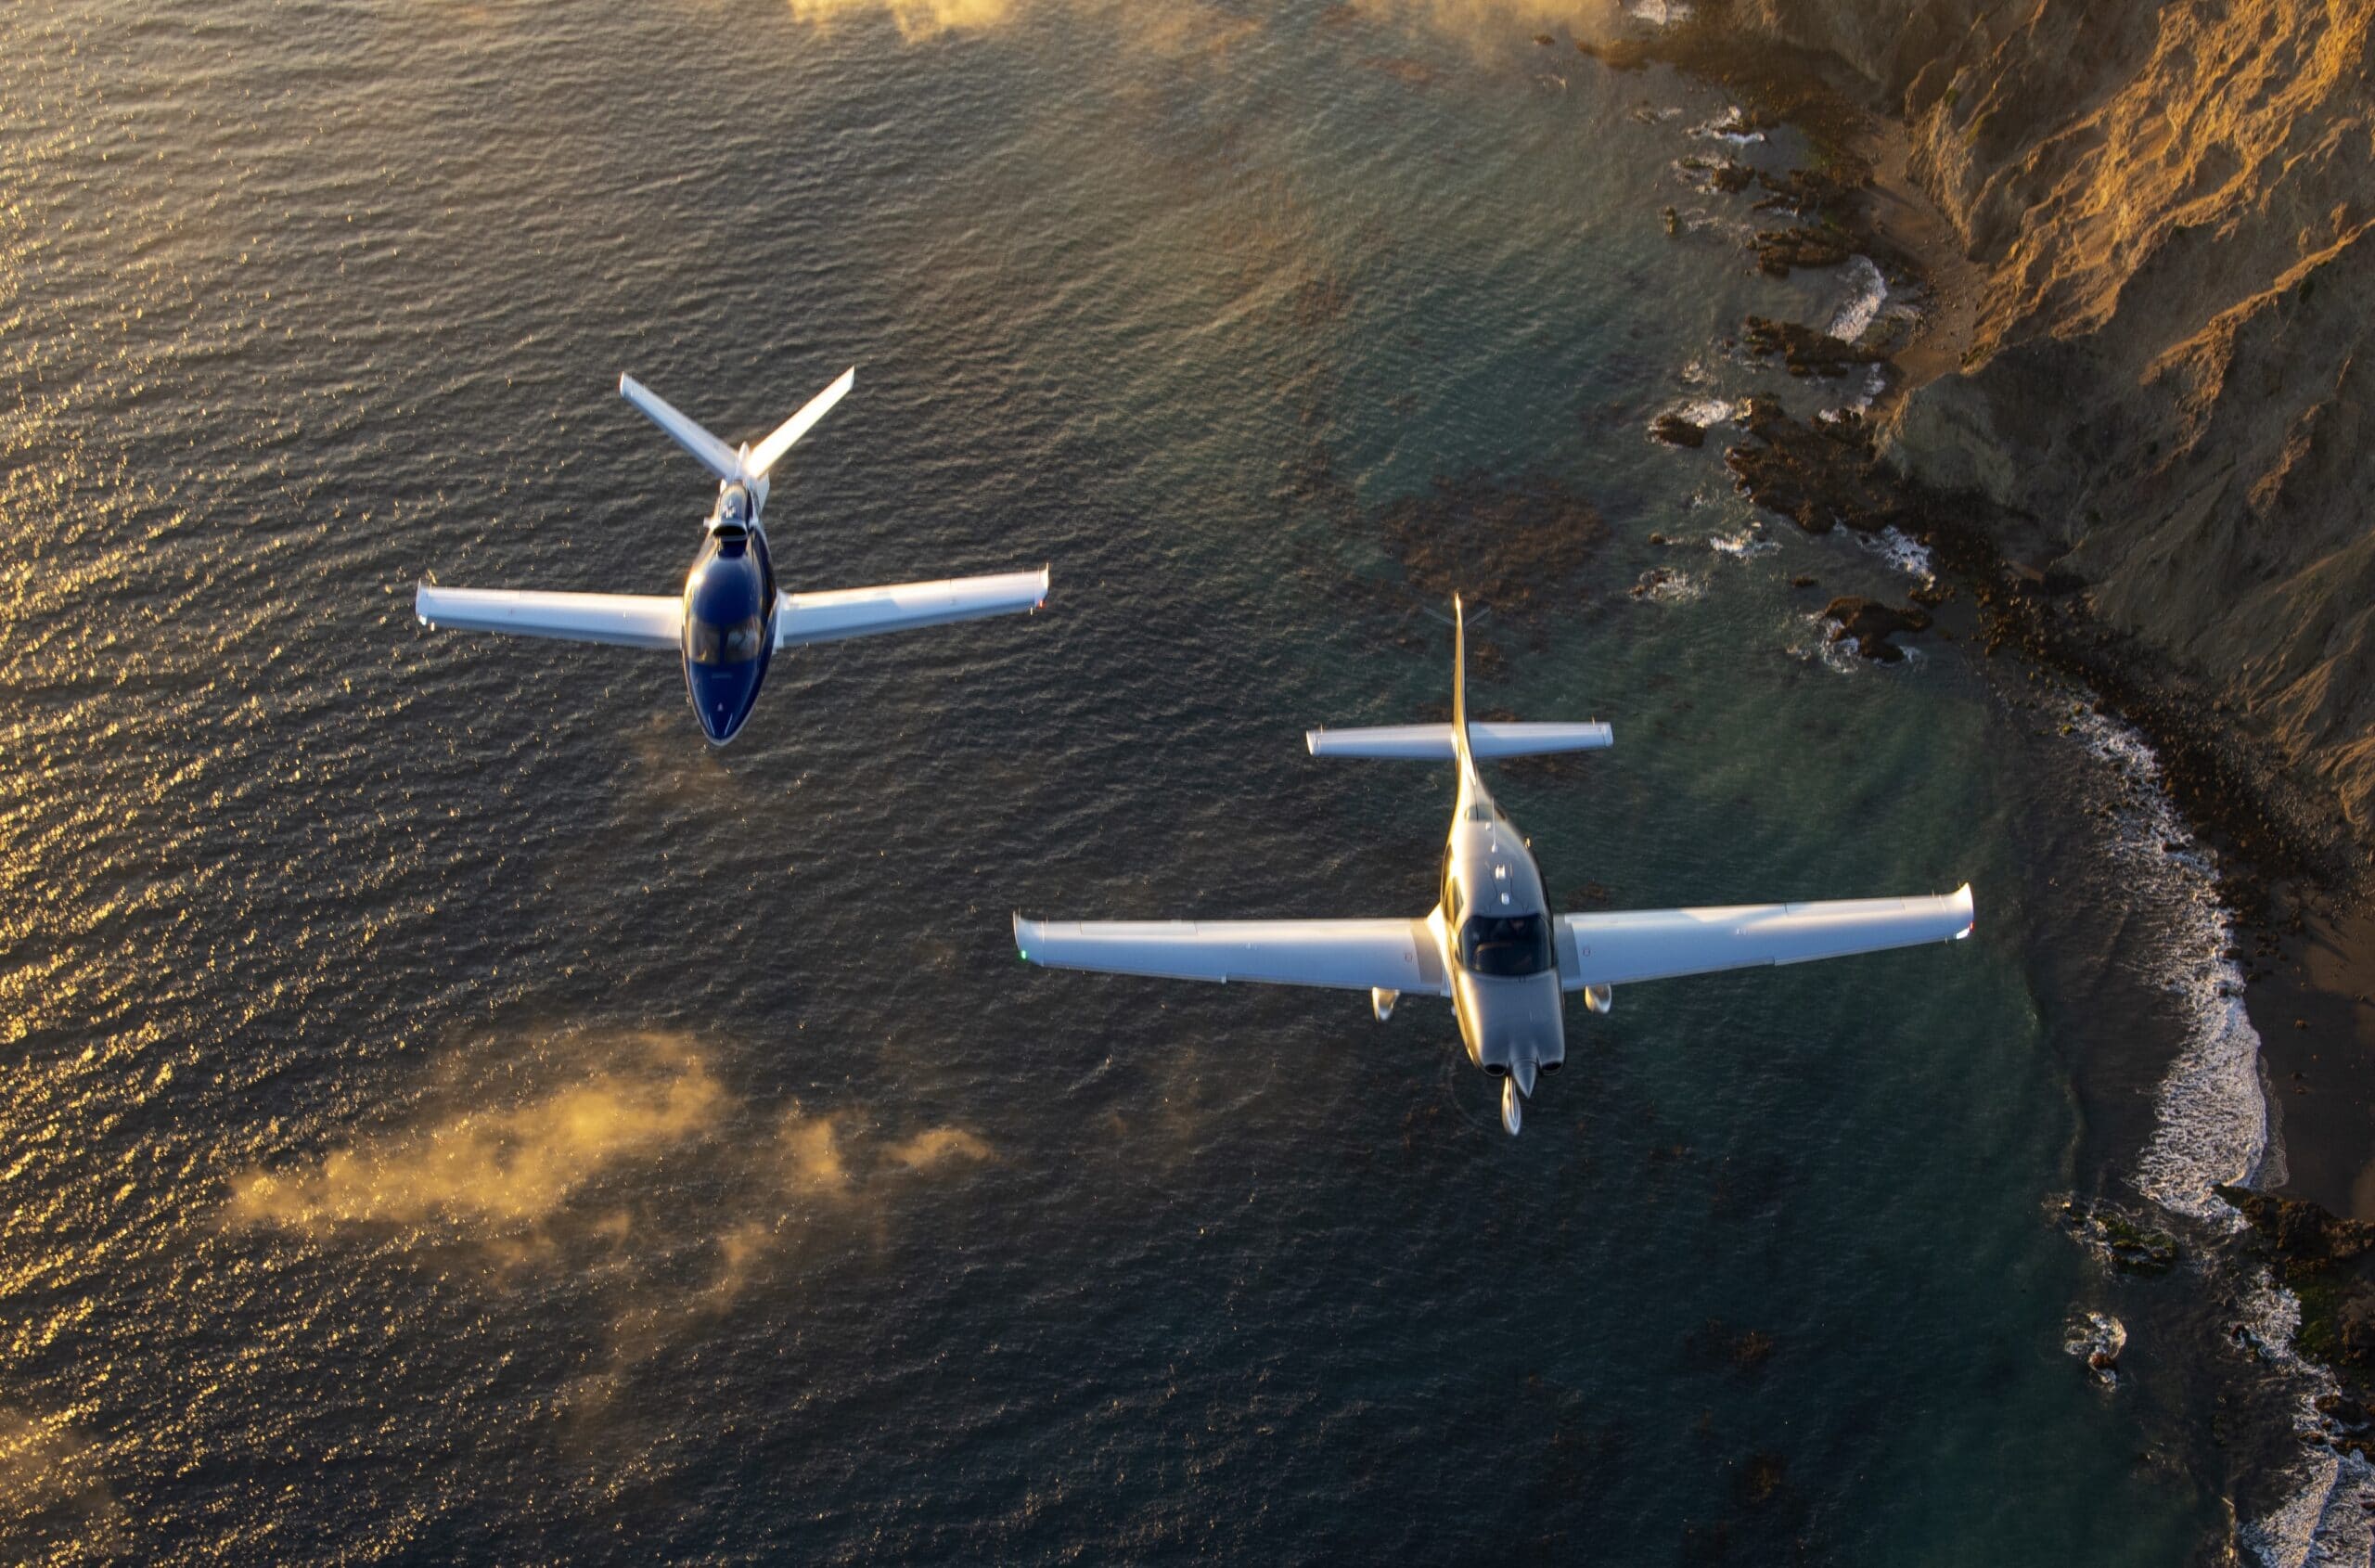 Cirrus Aircraft Delivers Top Performance in 2021 and Grows its Footprint